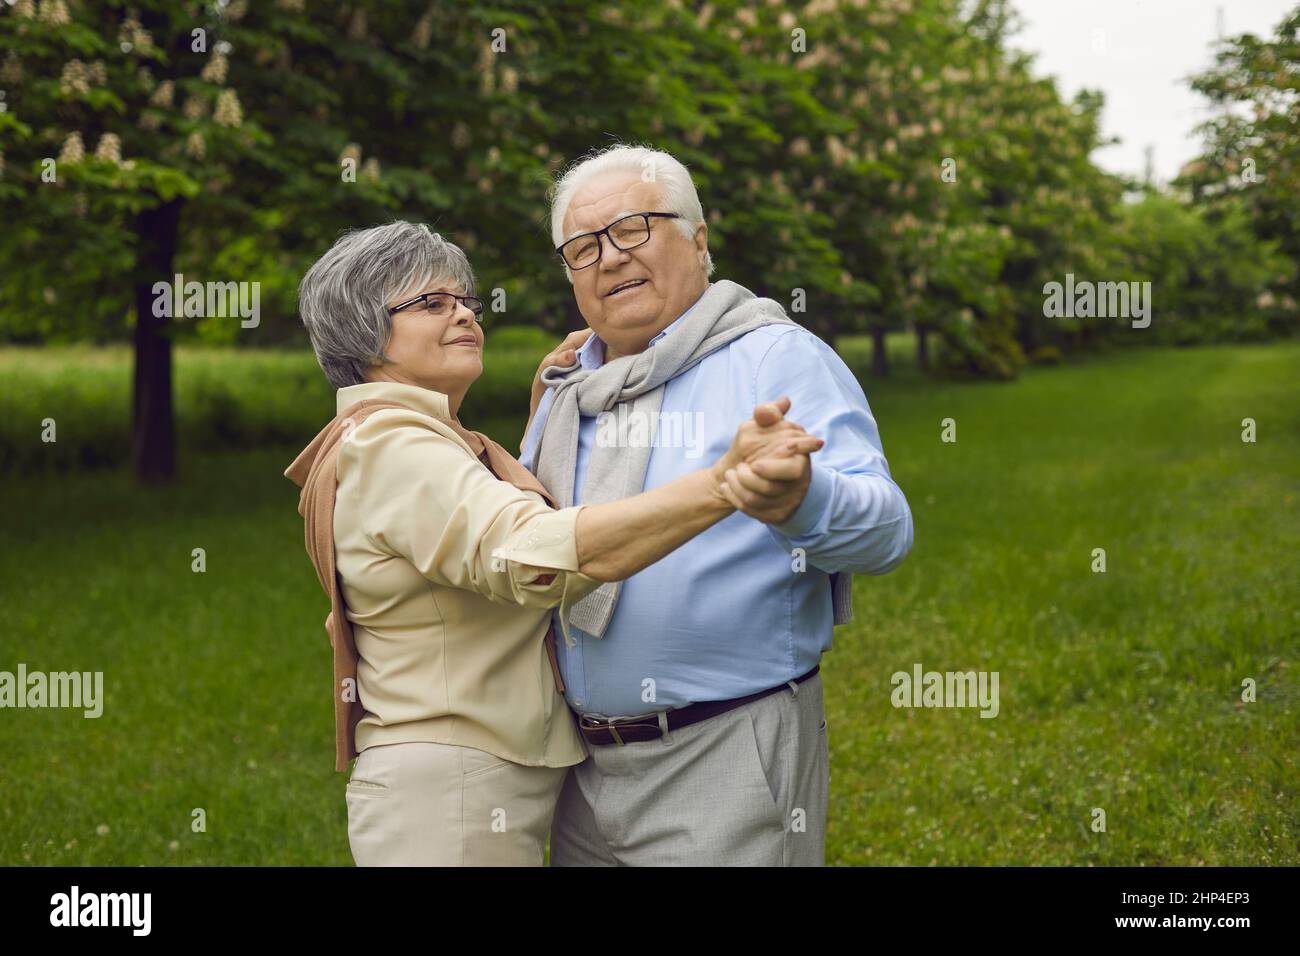 Happy loving mature senior couple dancing in park enjoy time together outdoors Stock Photo